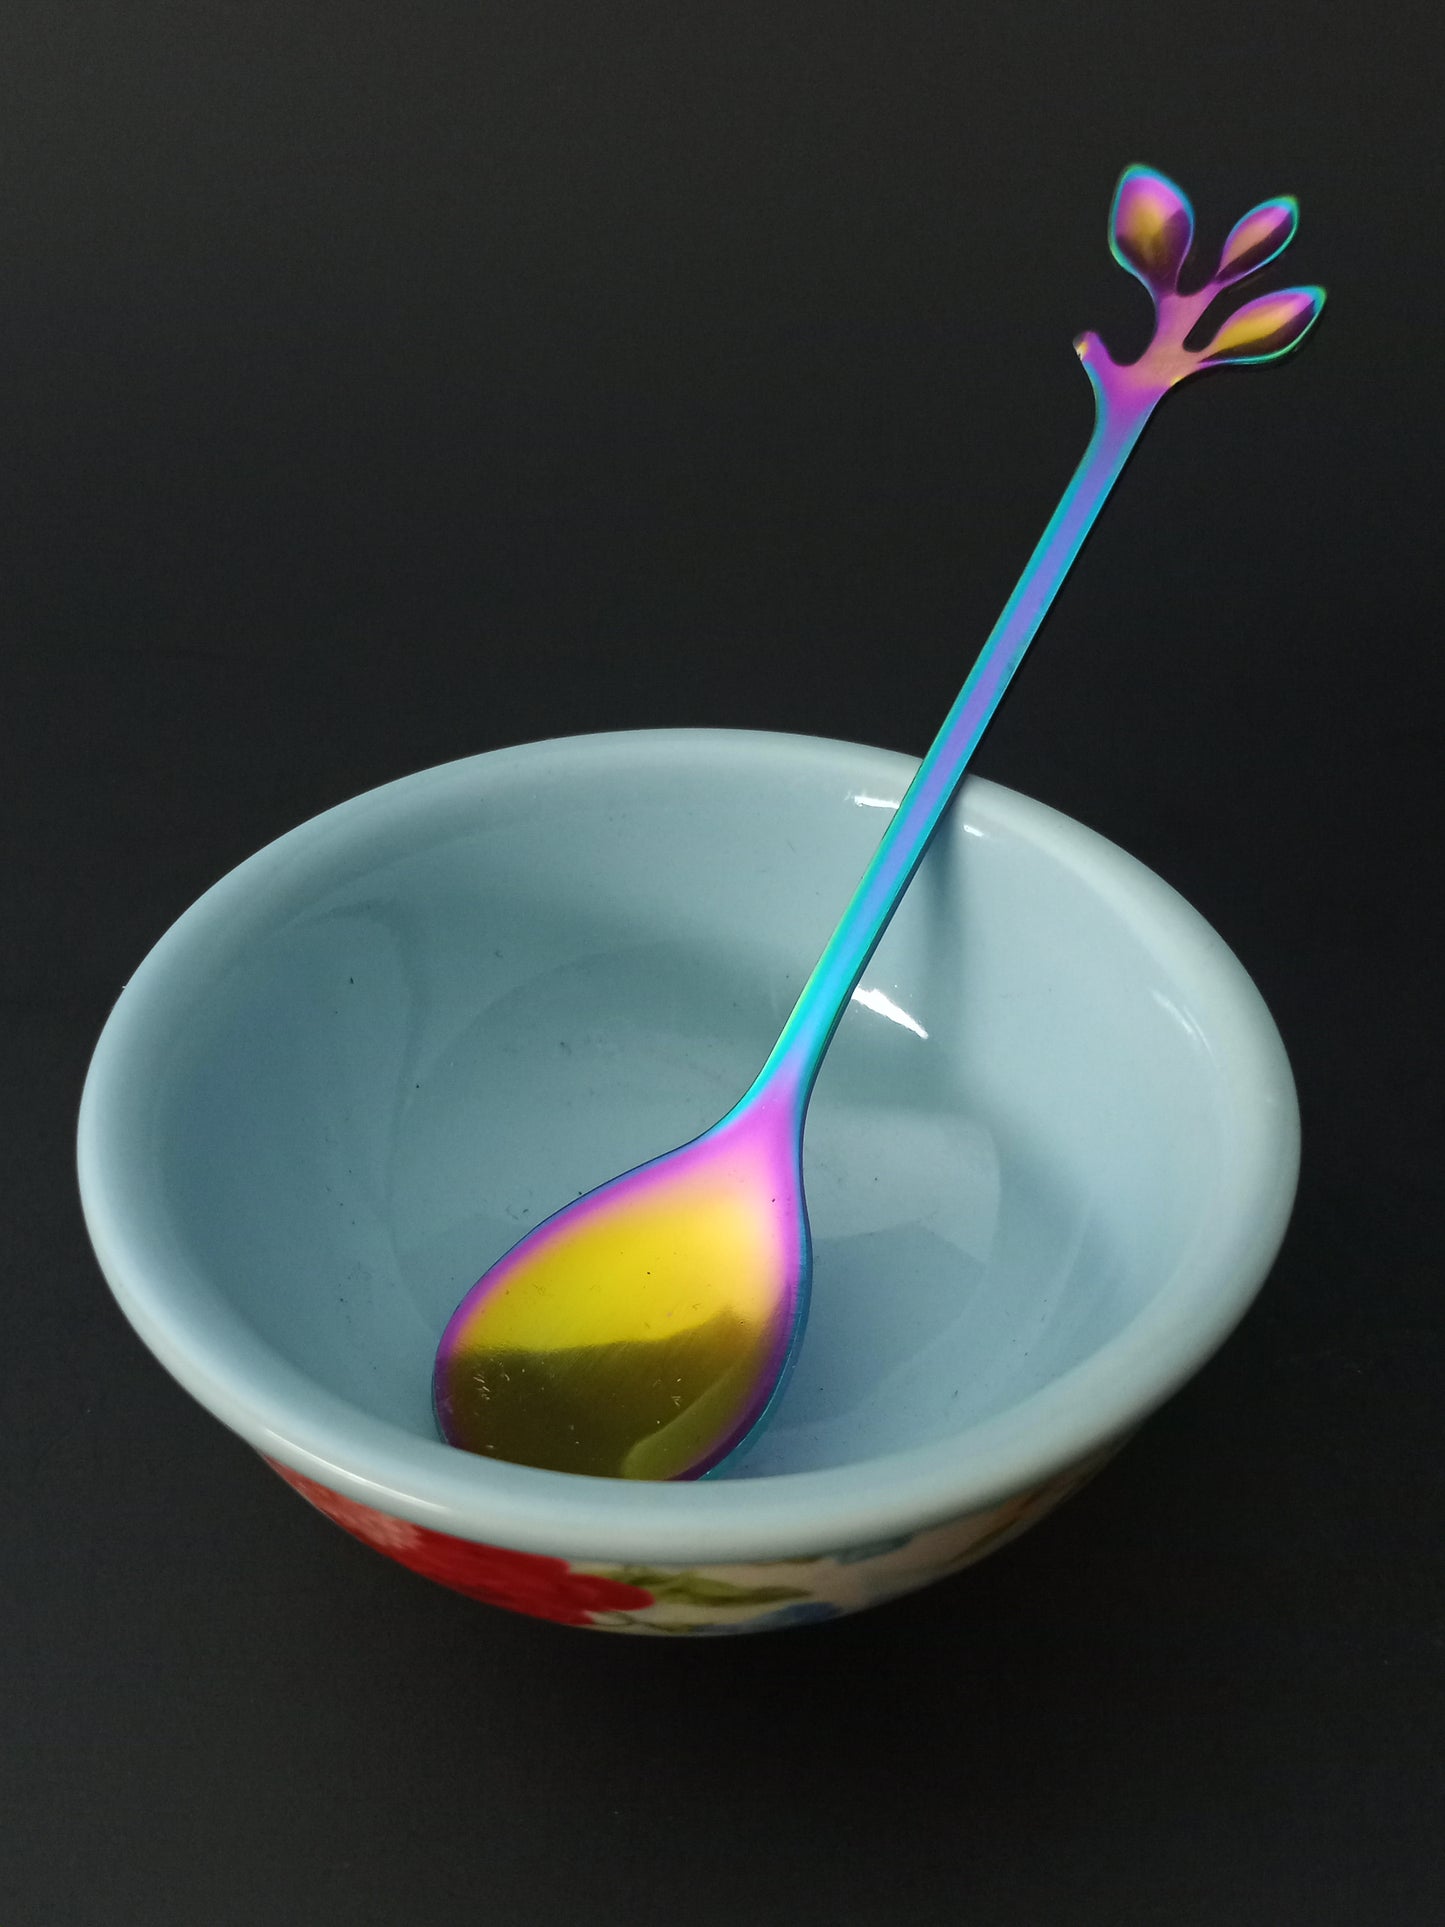 FACE MASK PIONEER WOMAN BOWL / SPOON SET